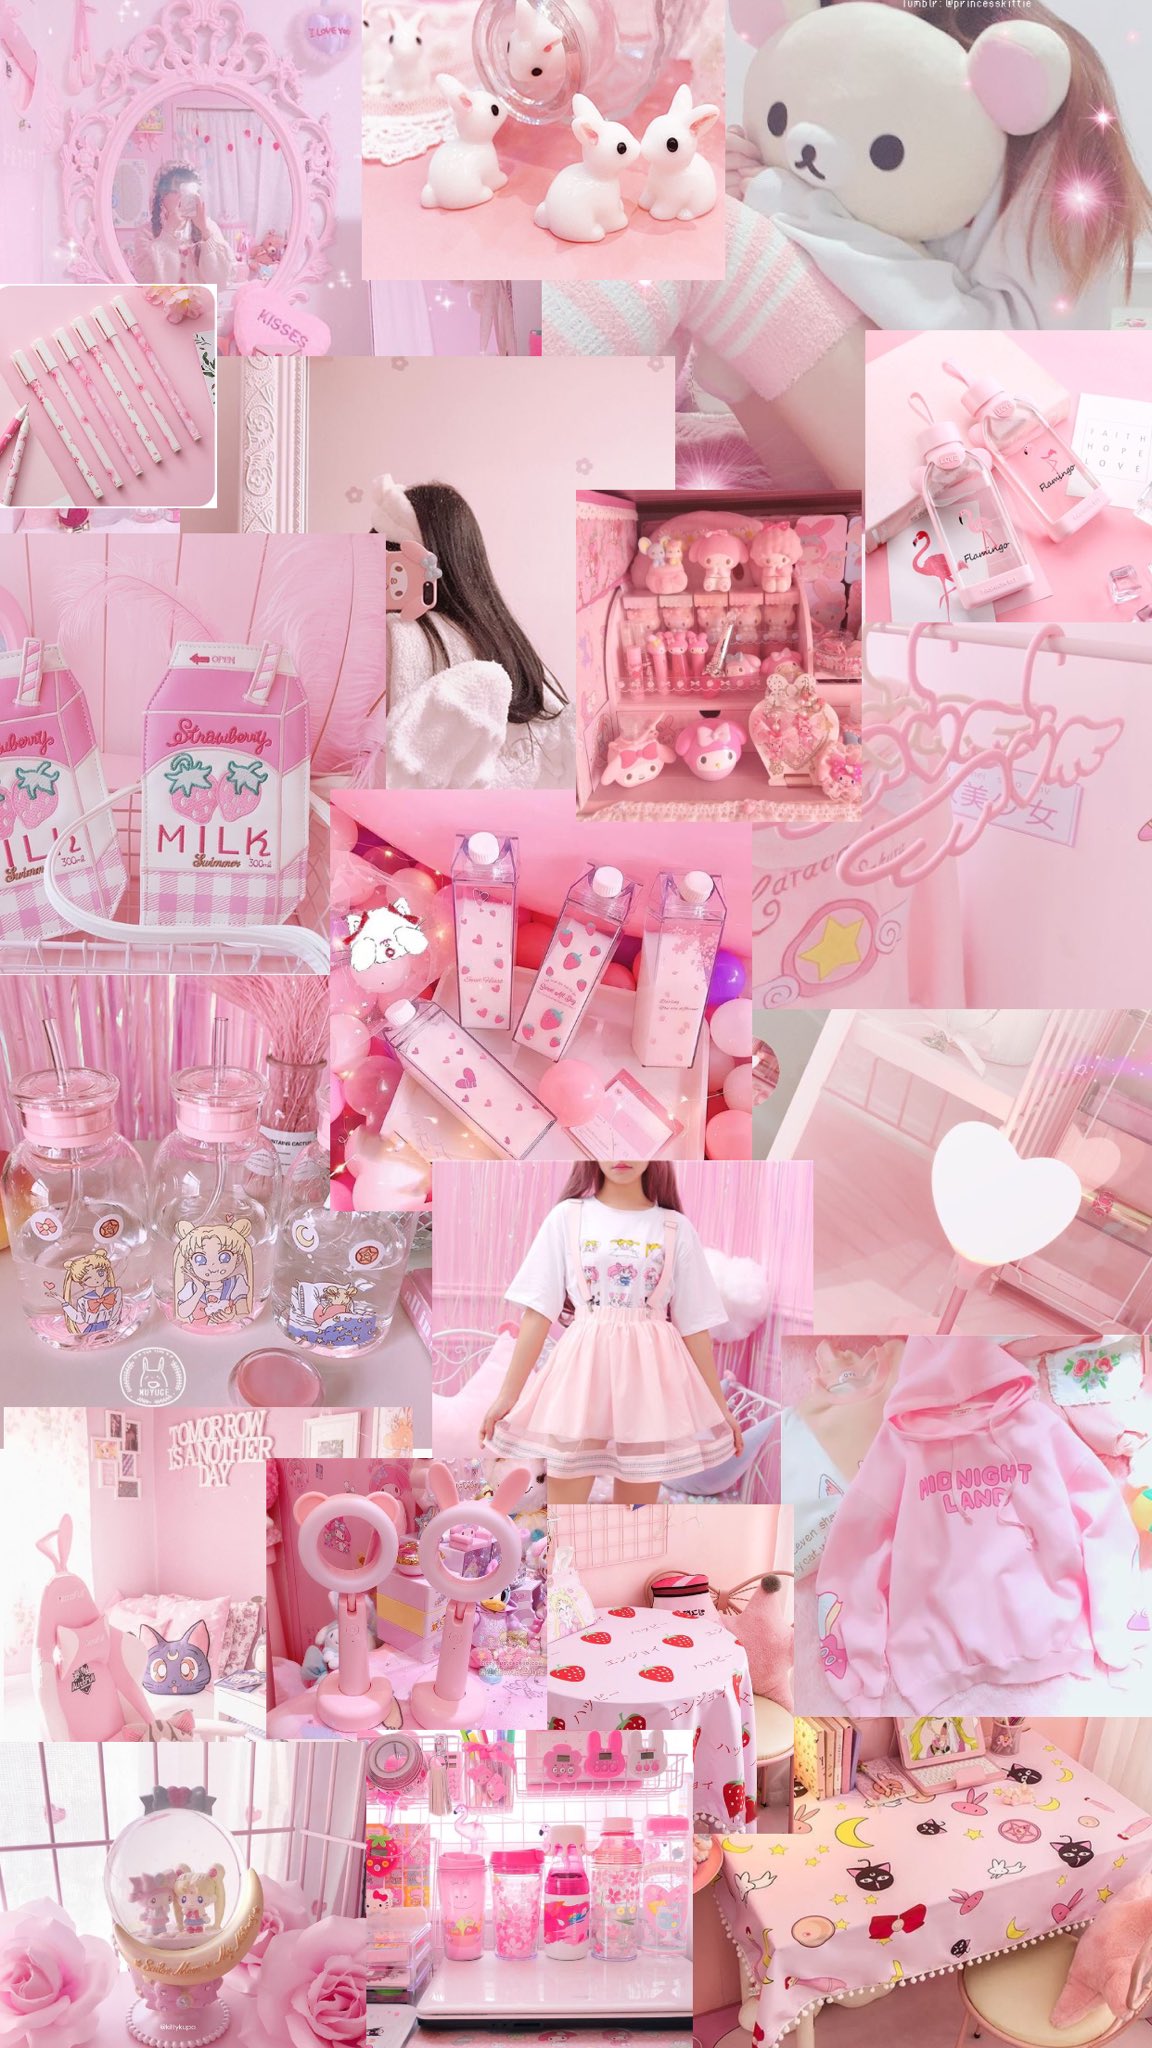 Strawberry Milk Collage Wallpapers - Wallpaper Cave